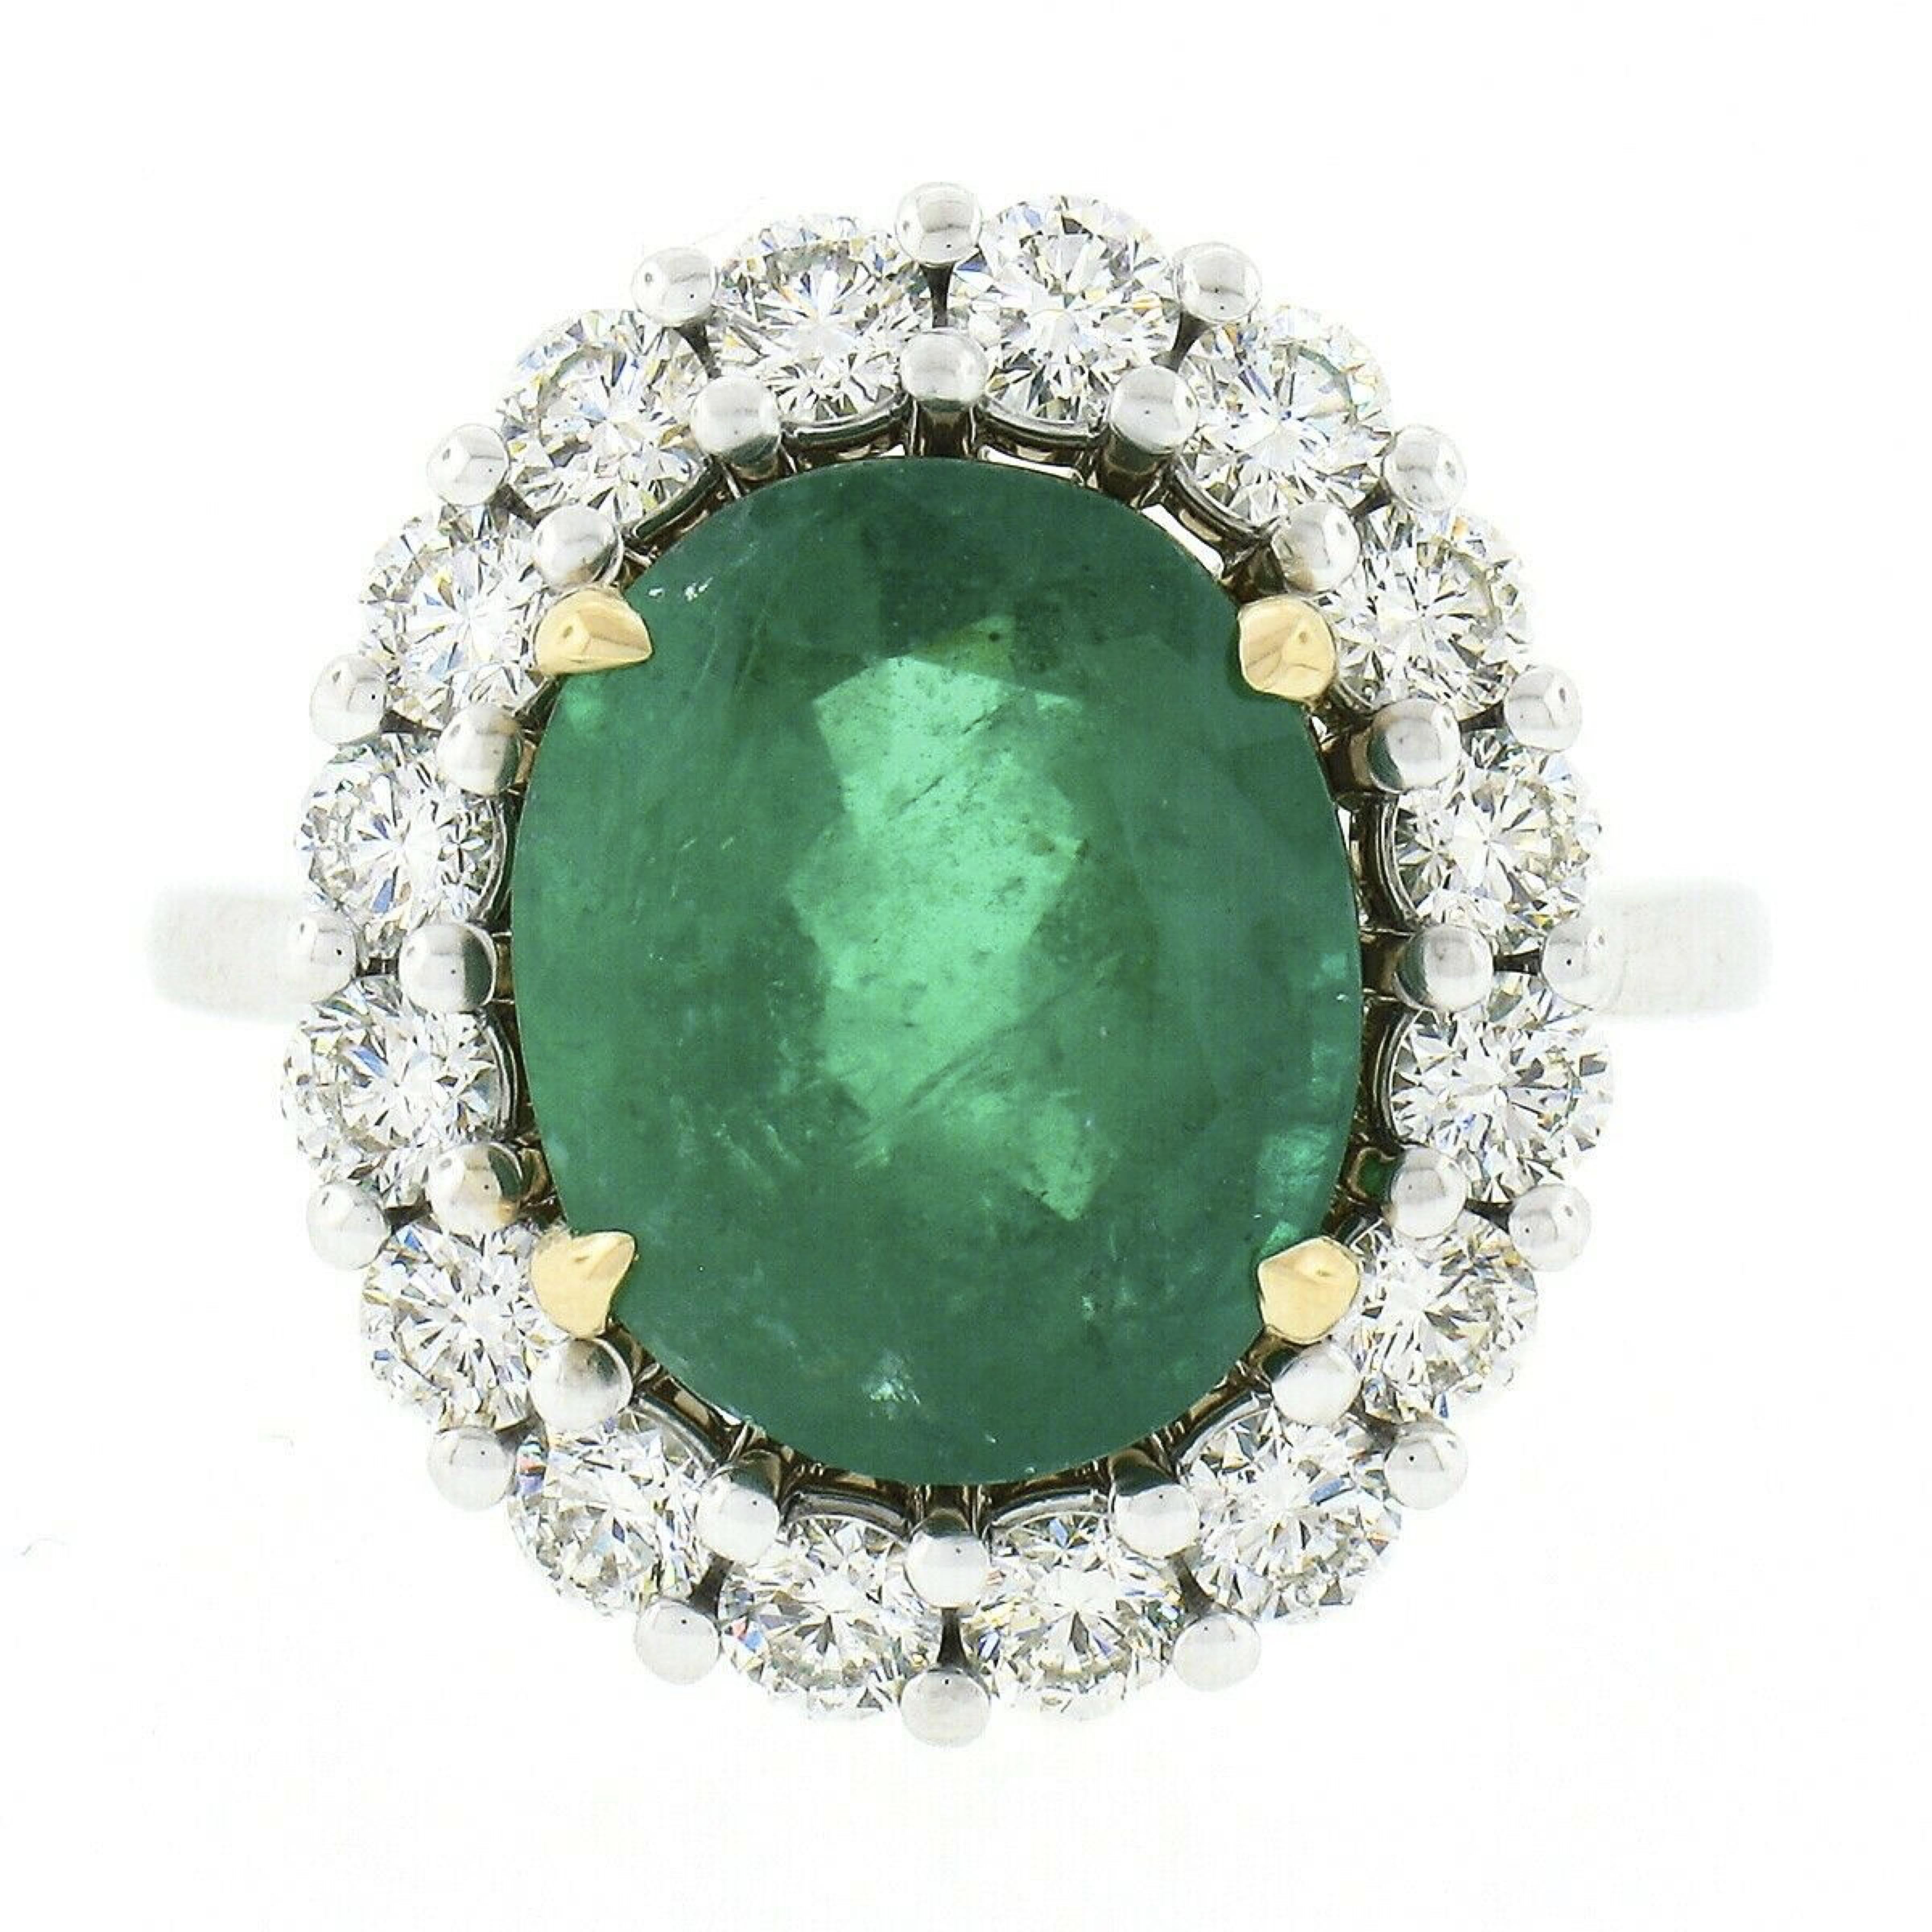 Women's New 18k TT Gold 7.94ct GIA Oval Emerald w/ Diamond Halo Engagement Cocktail Ring